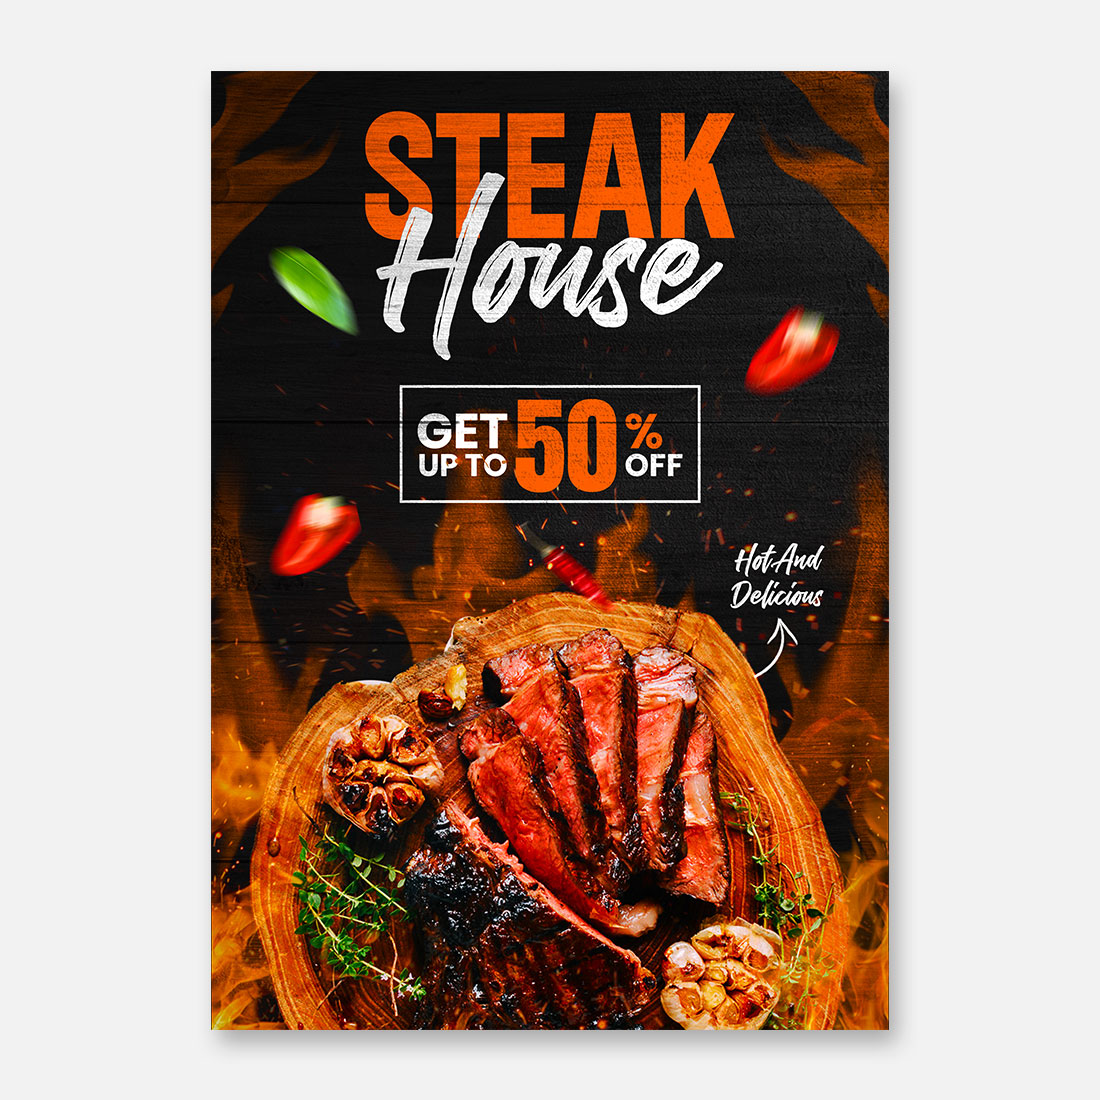 Steak house flyer design template preview image.